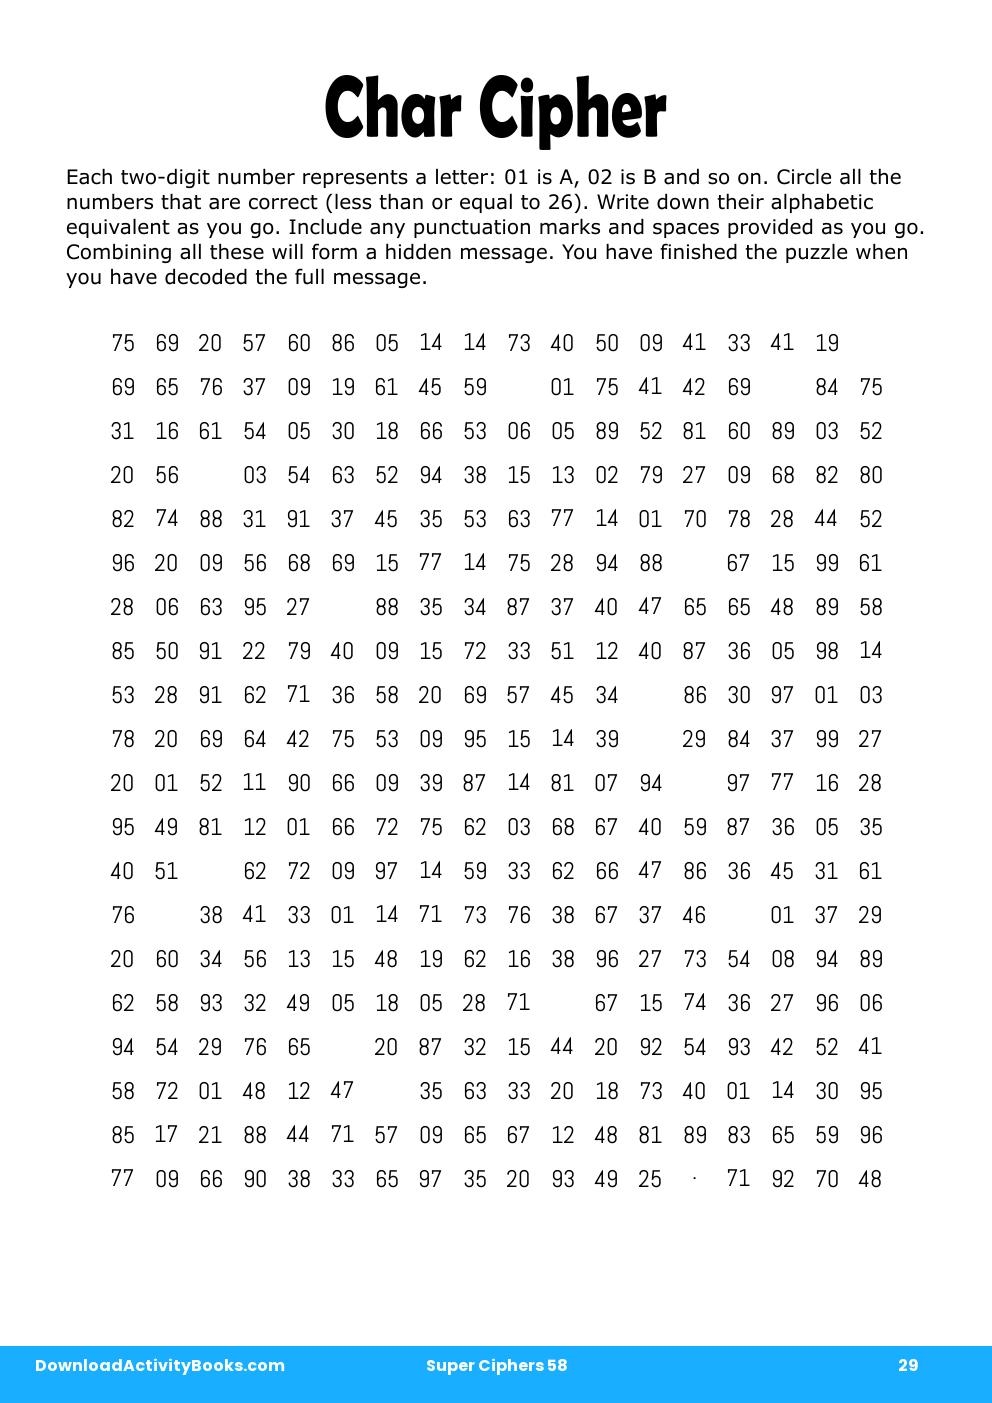 Char Cipher in Super Ciphers 58